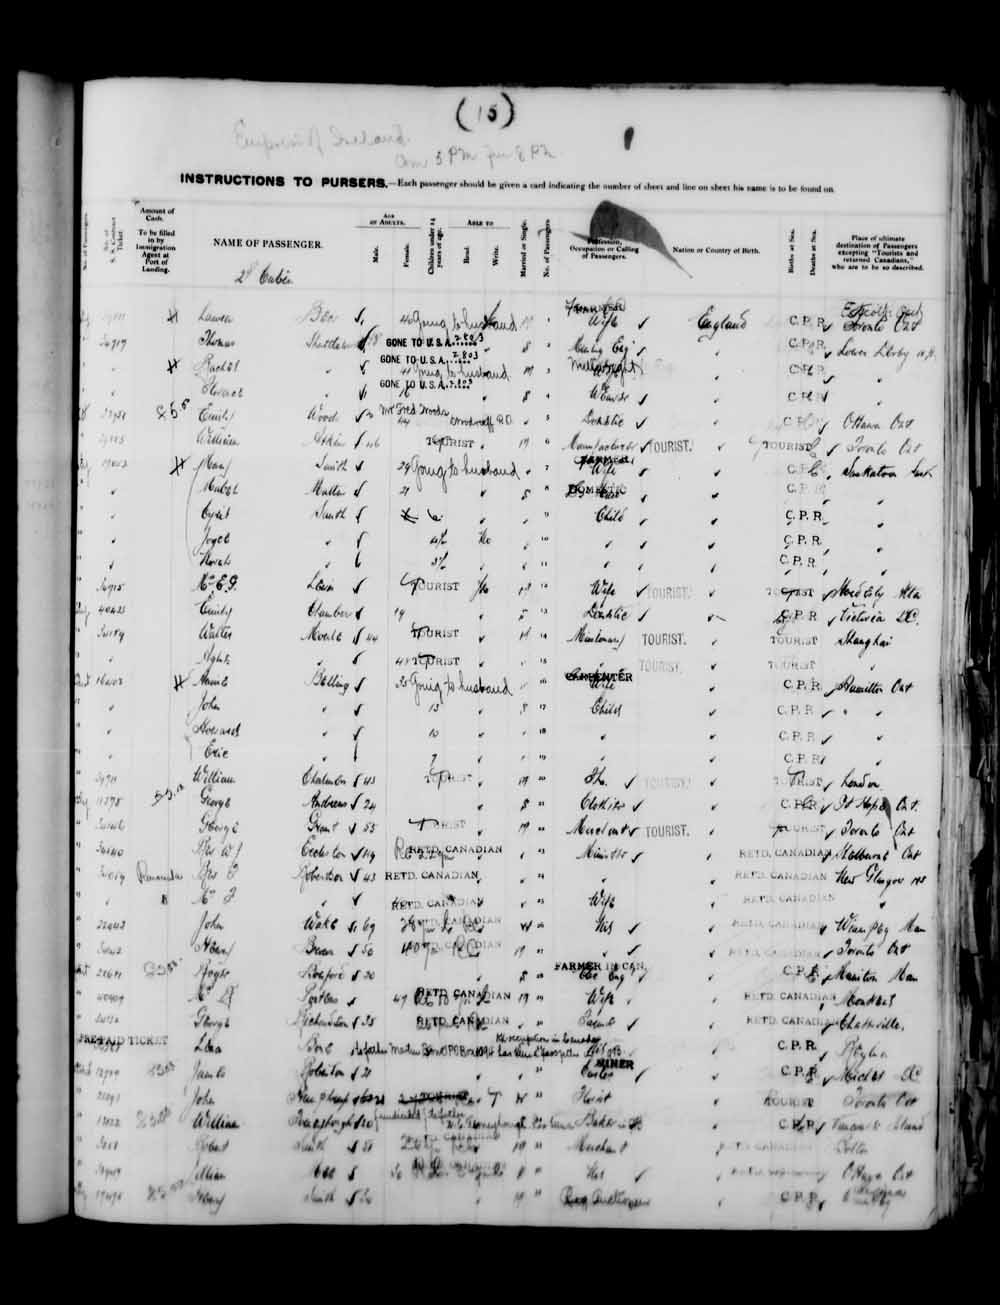 Digitized page of Quebec Passenger Lists for Image No.: e003591586